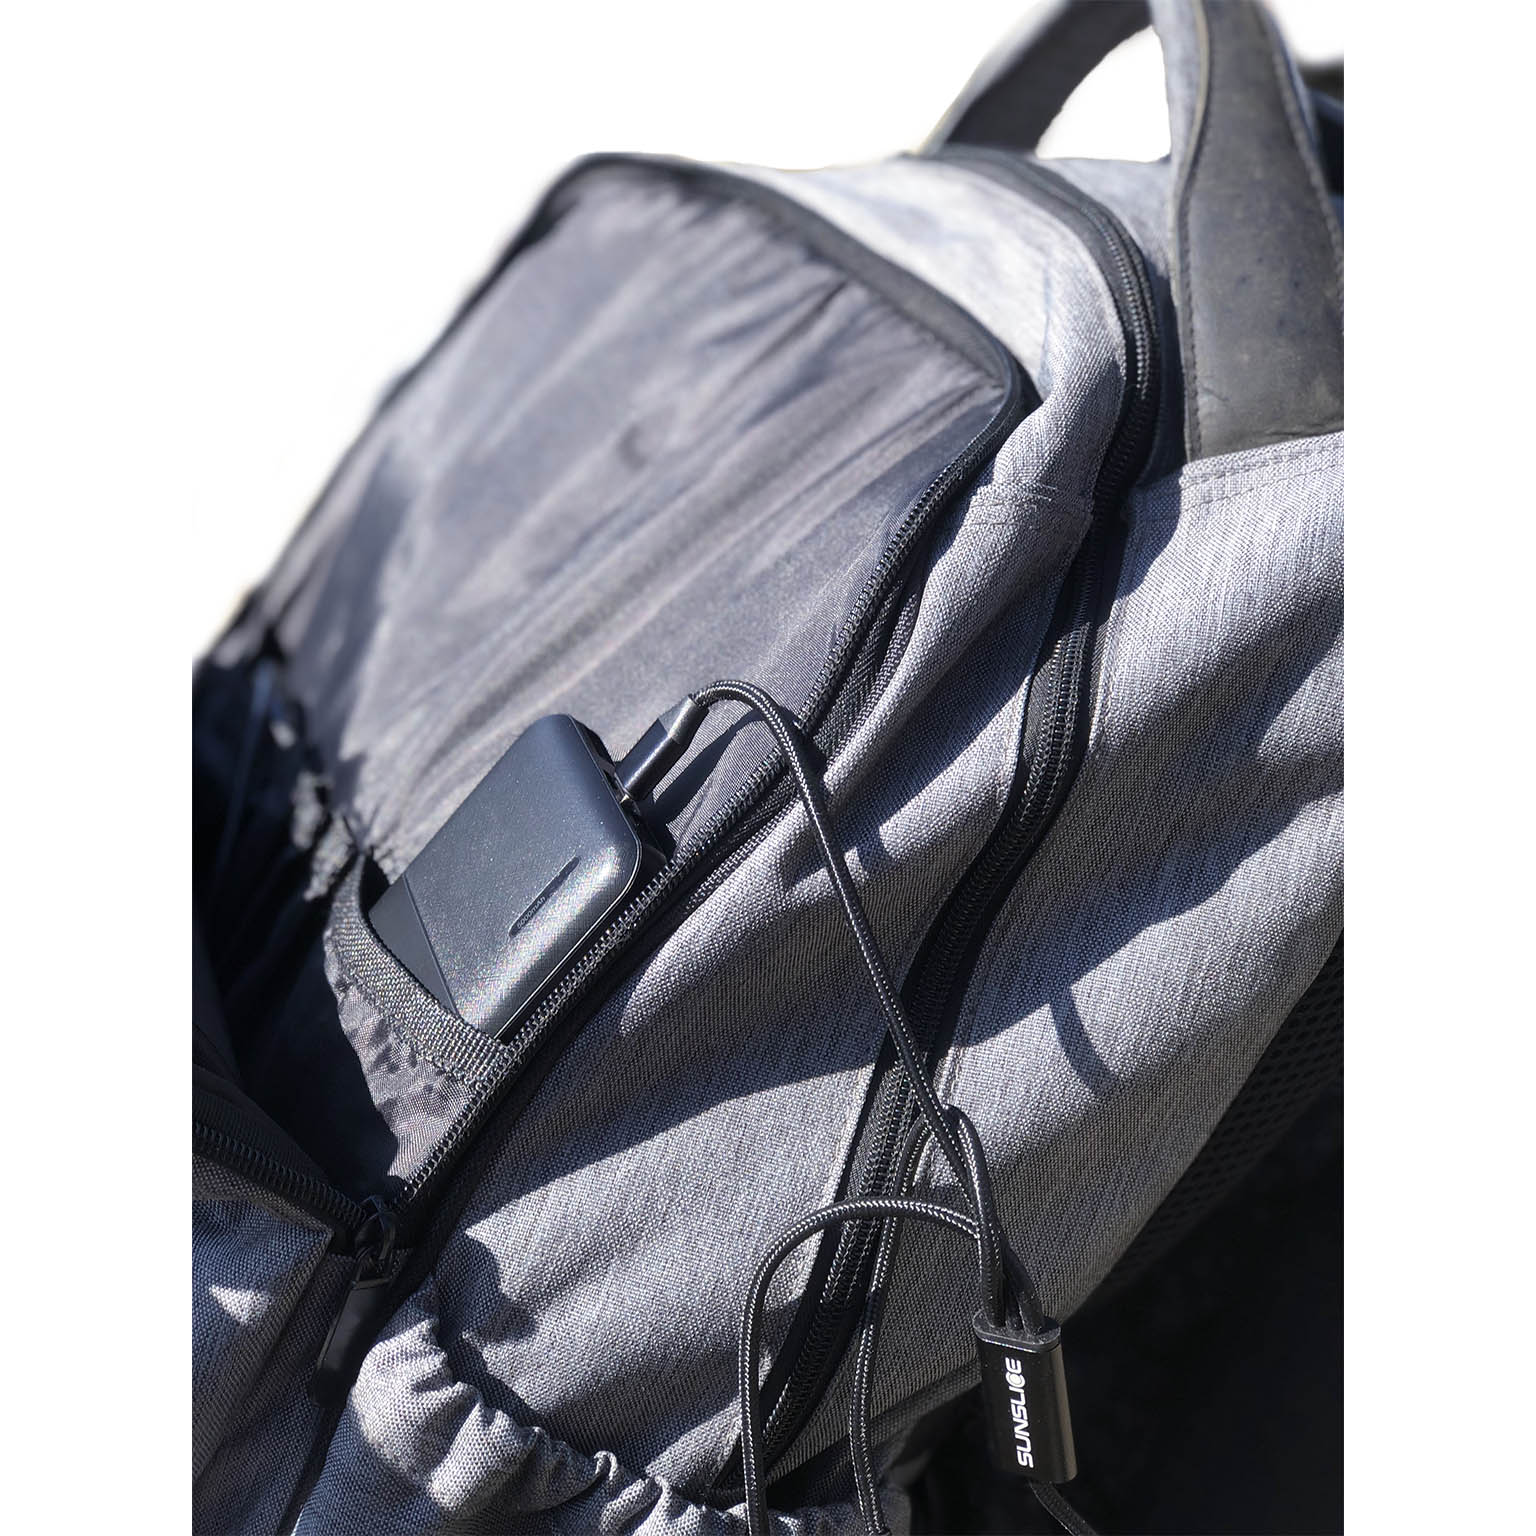 Zenith - Solar Backpack - with its Powerbank